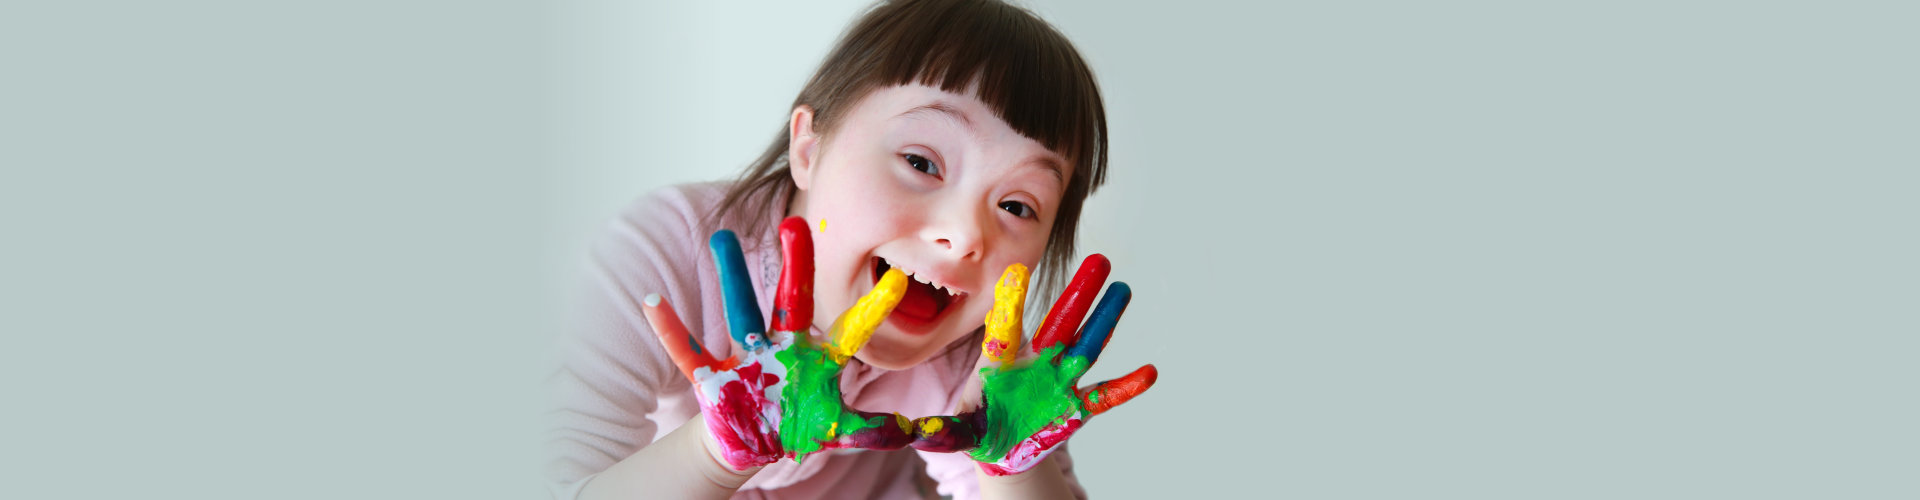 smiling child with painted hands.